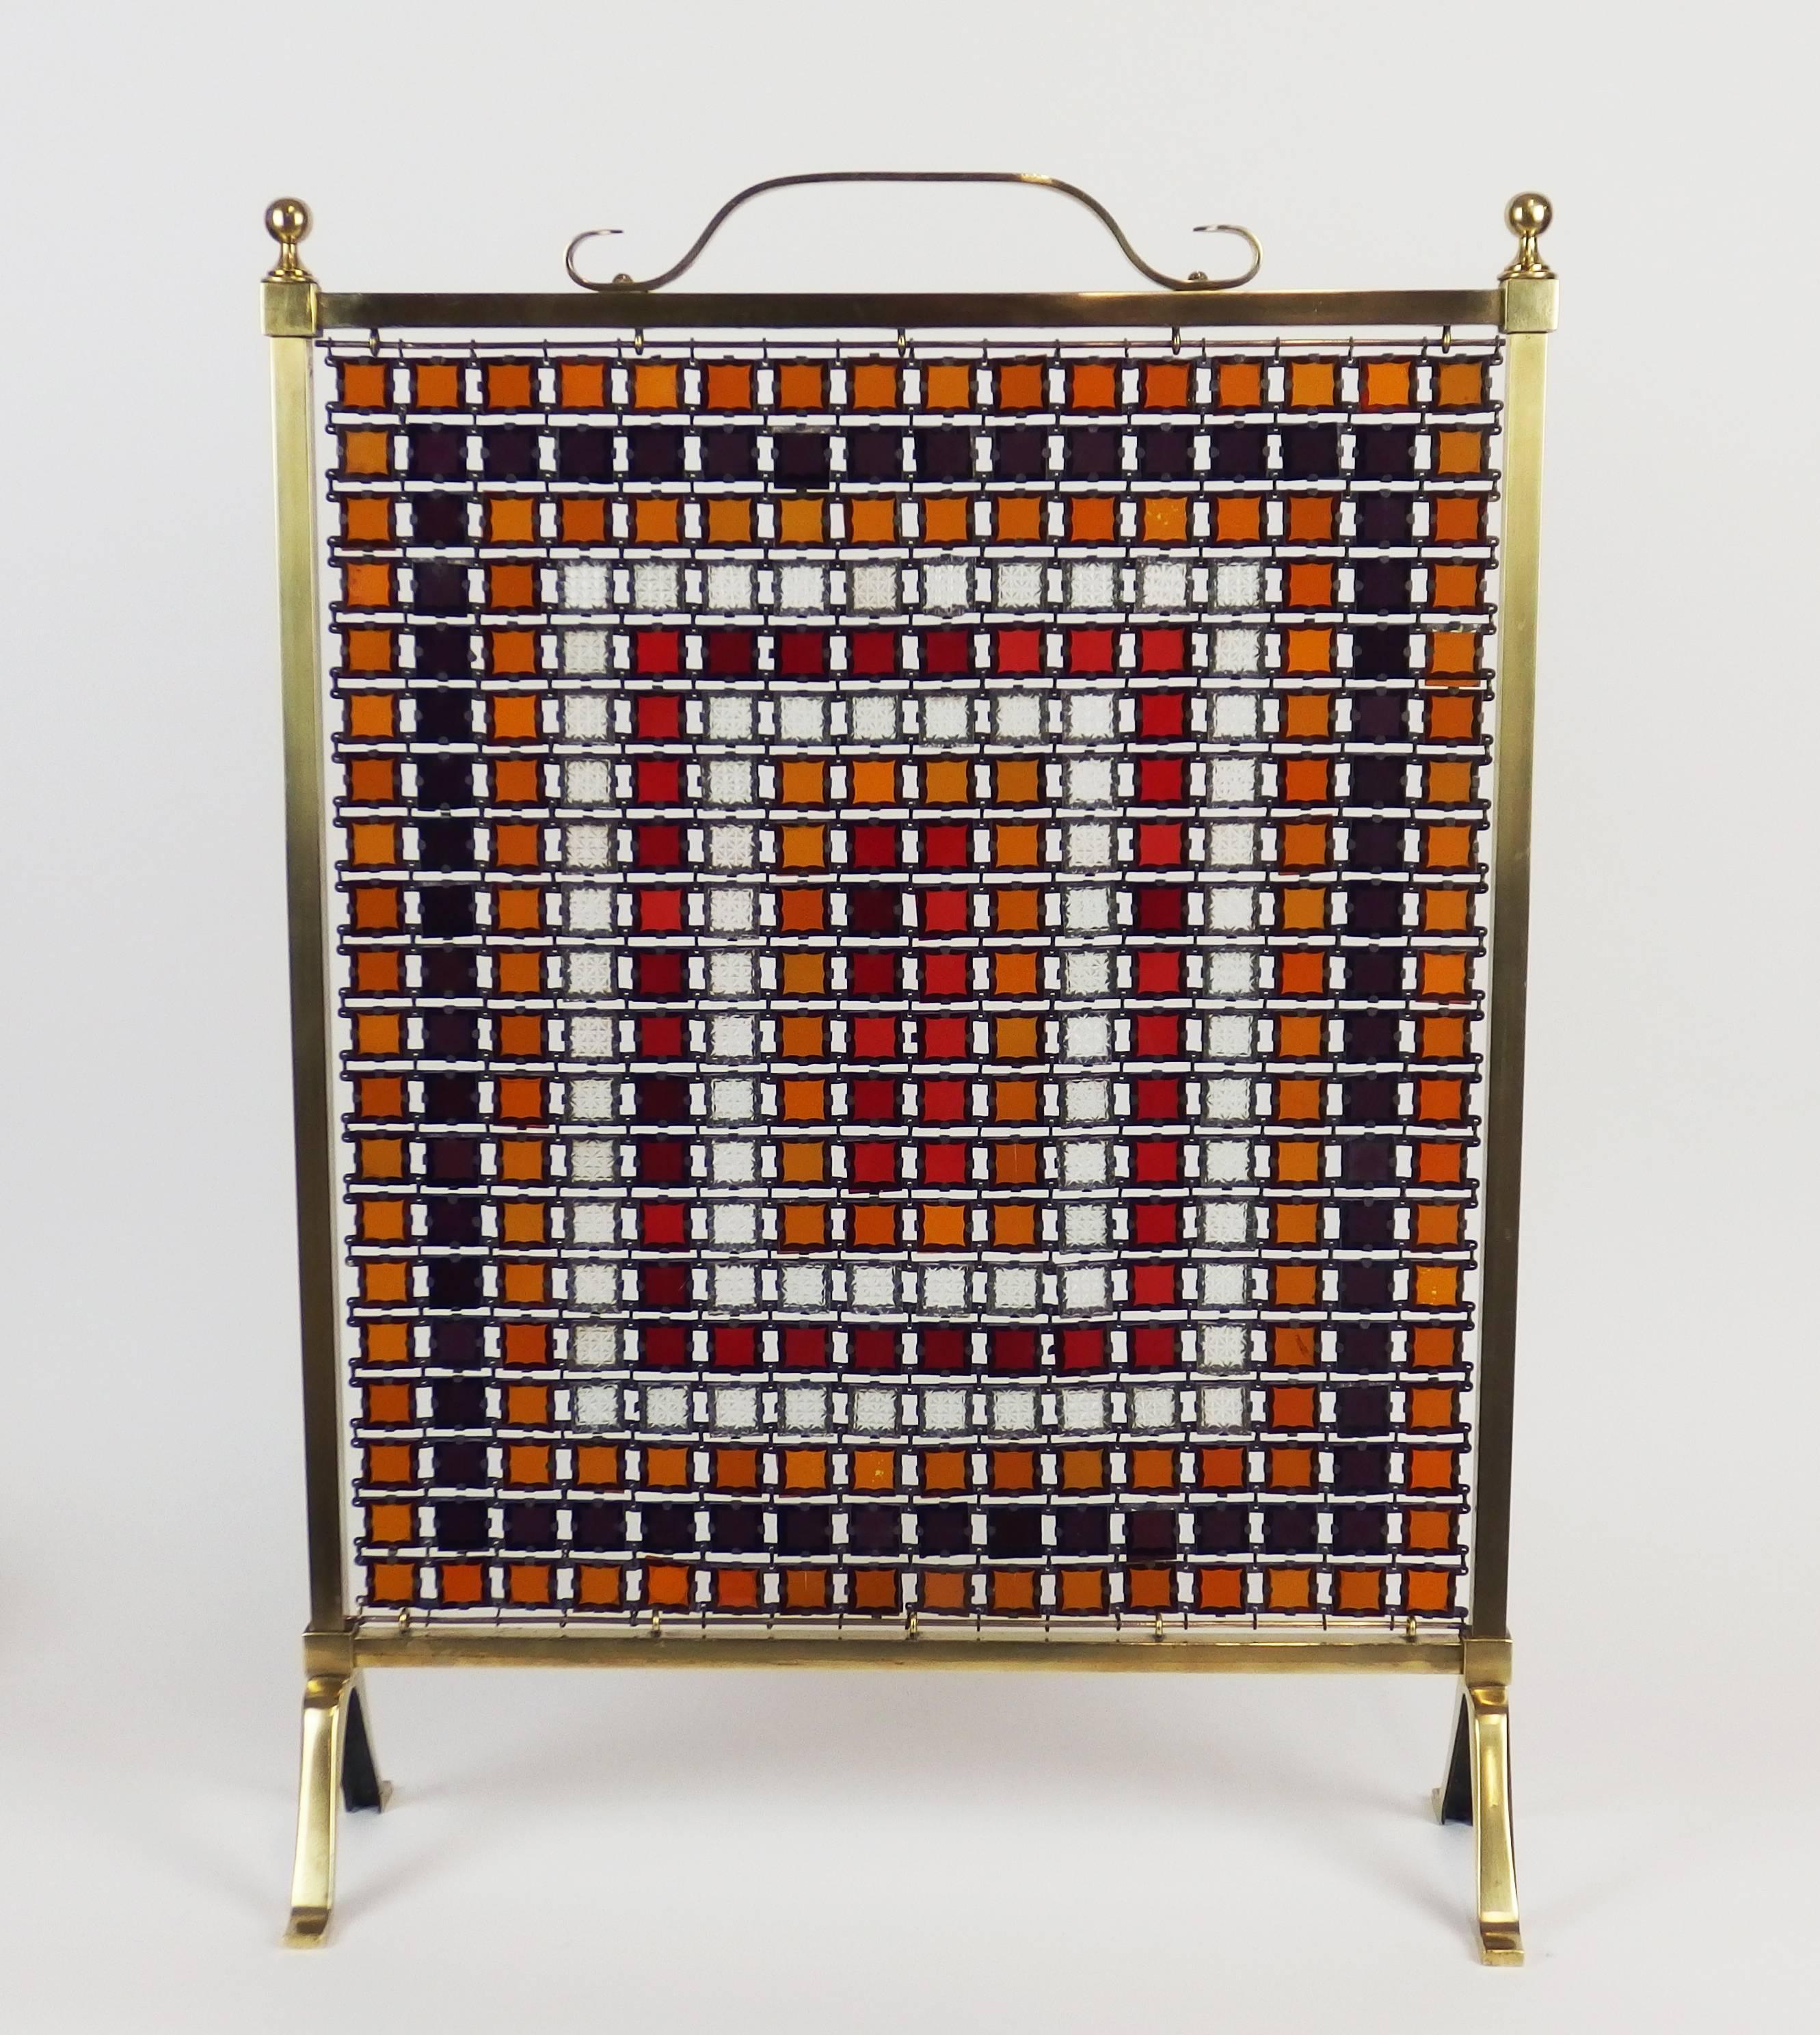 A chain mail fire screen with red, yellow, purple, white glass tiles inserted in zinc frames, hung in a brass and bronze frame. Unidentified stamp under the base.